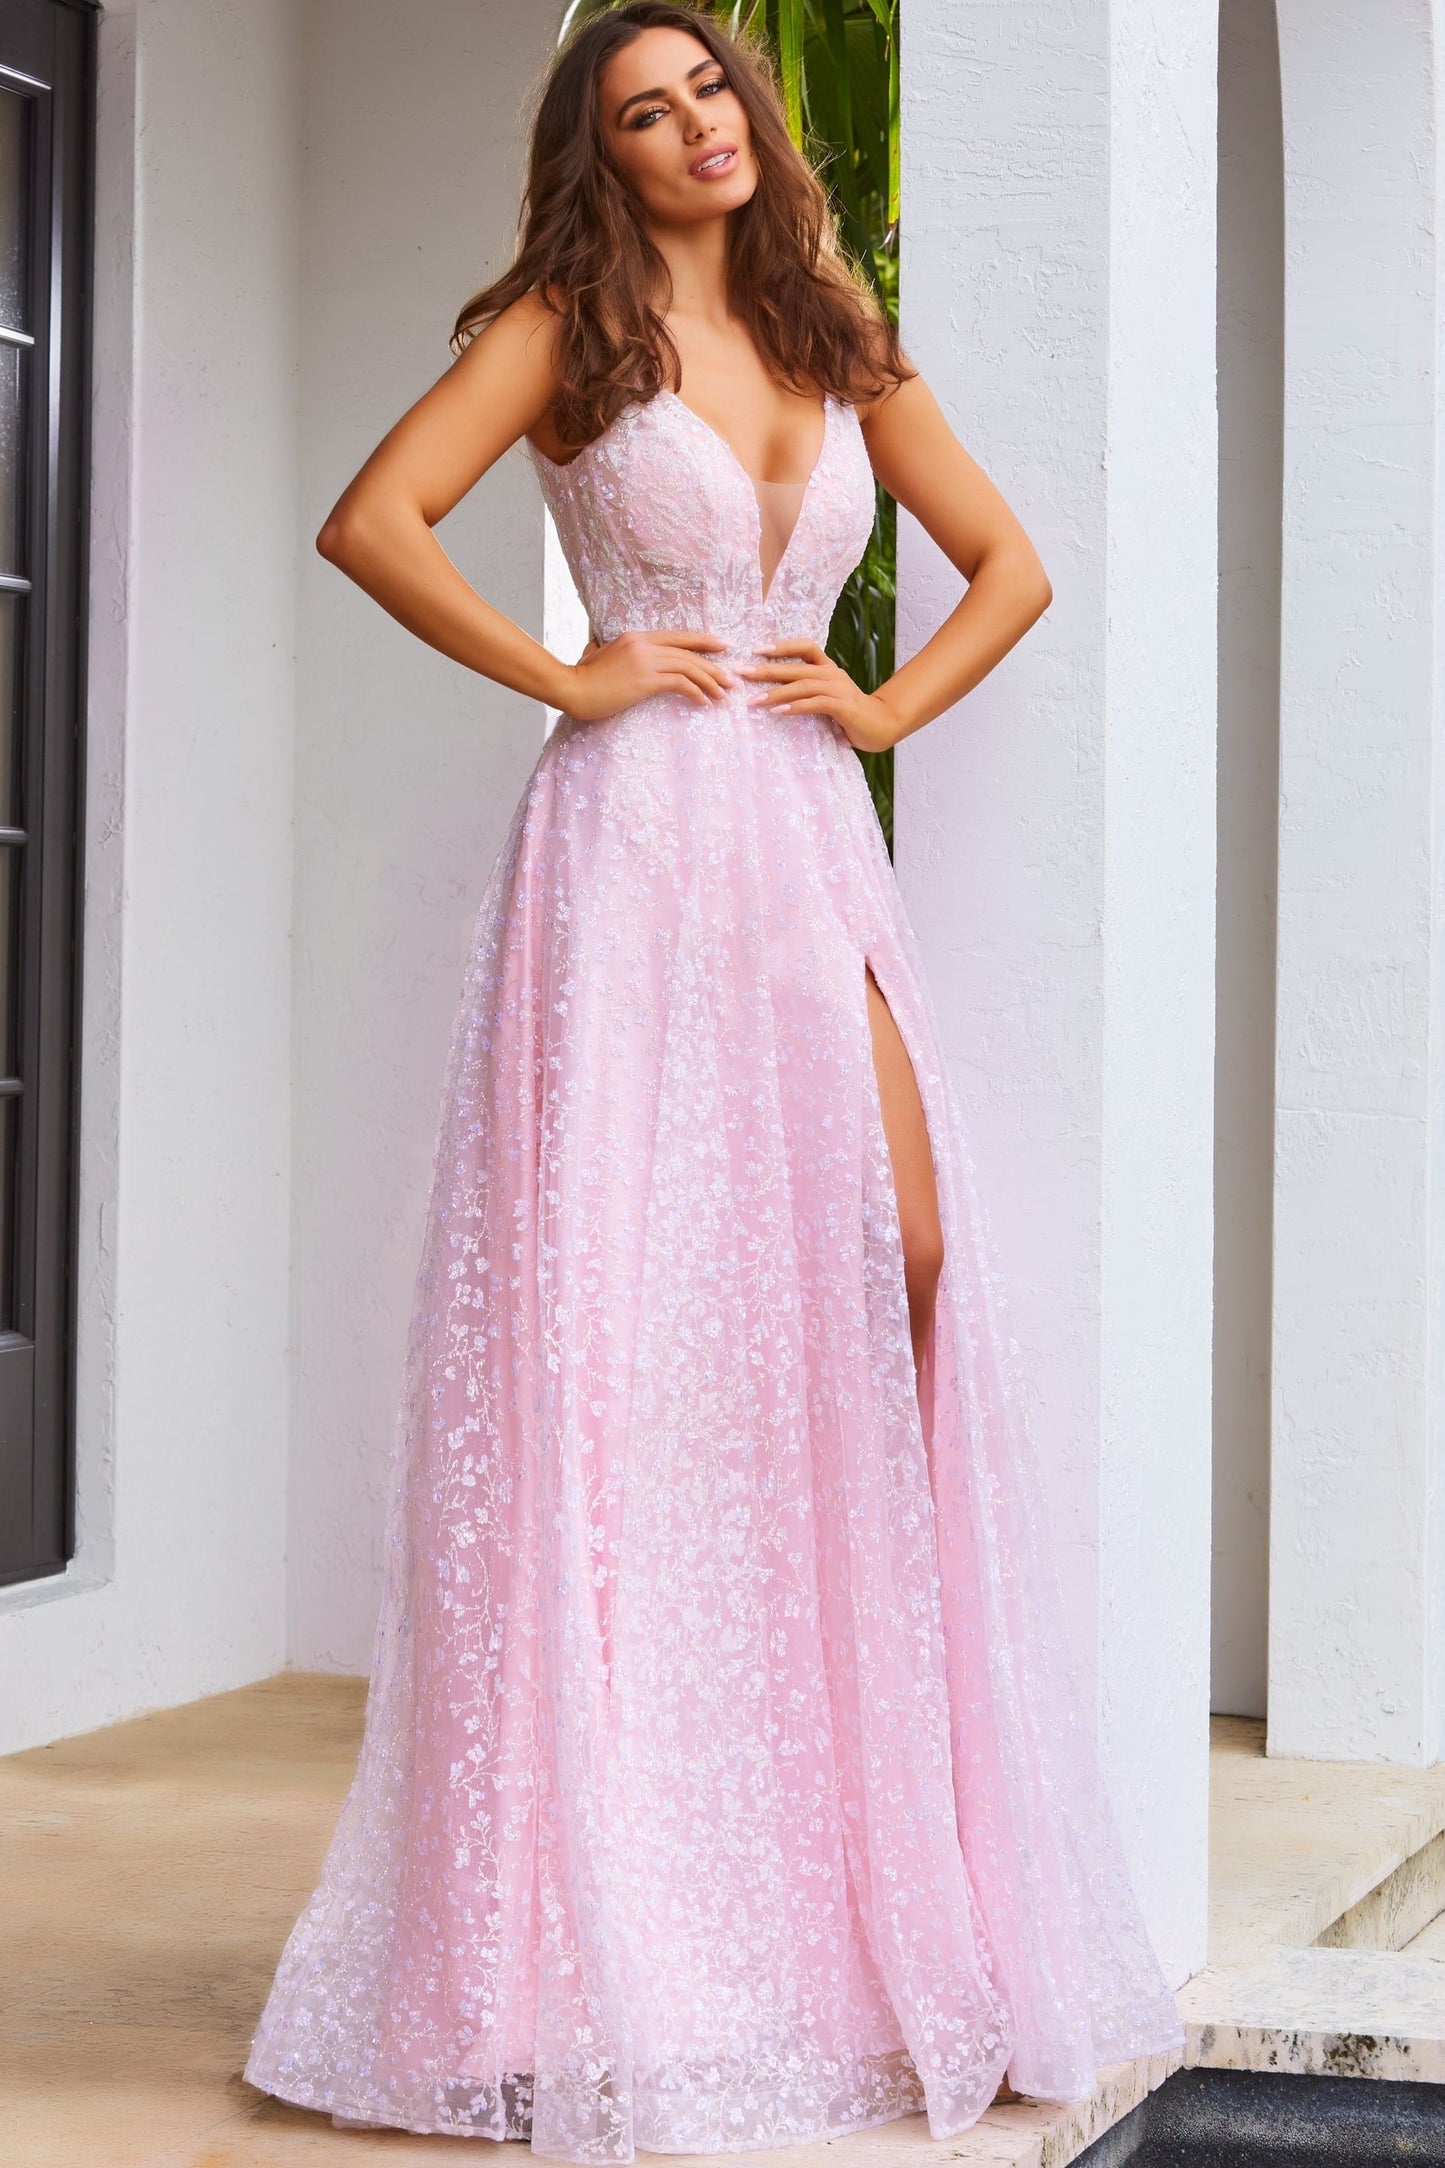 JVN08421 Lace A Line Prom Dress Plunging Neckline Mesh insert Sequined with  a Train and Slit